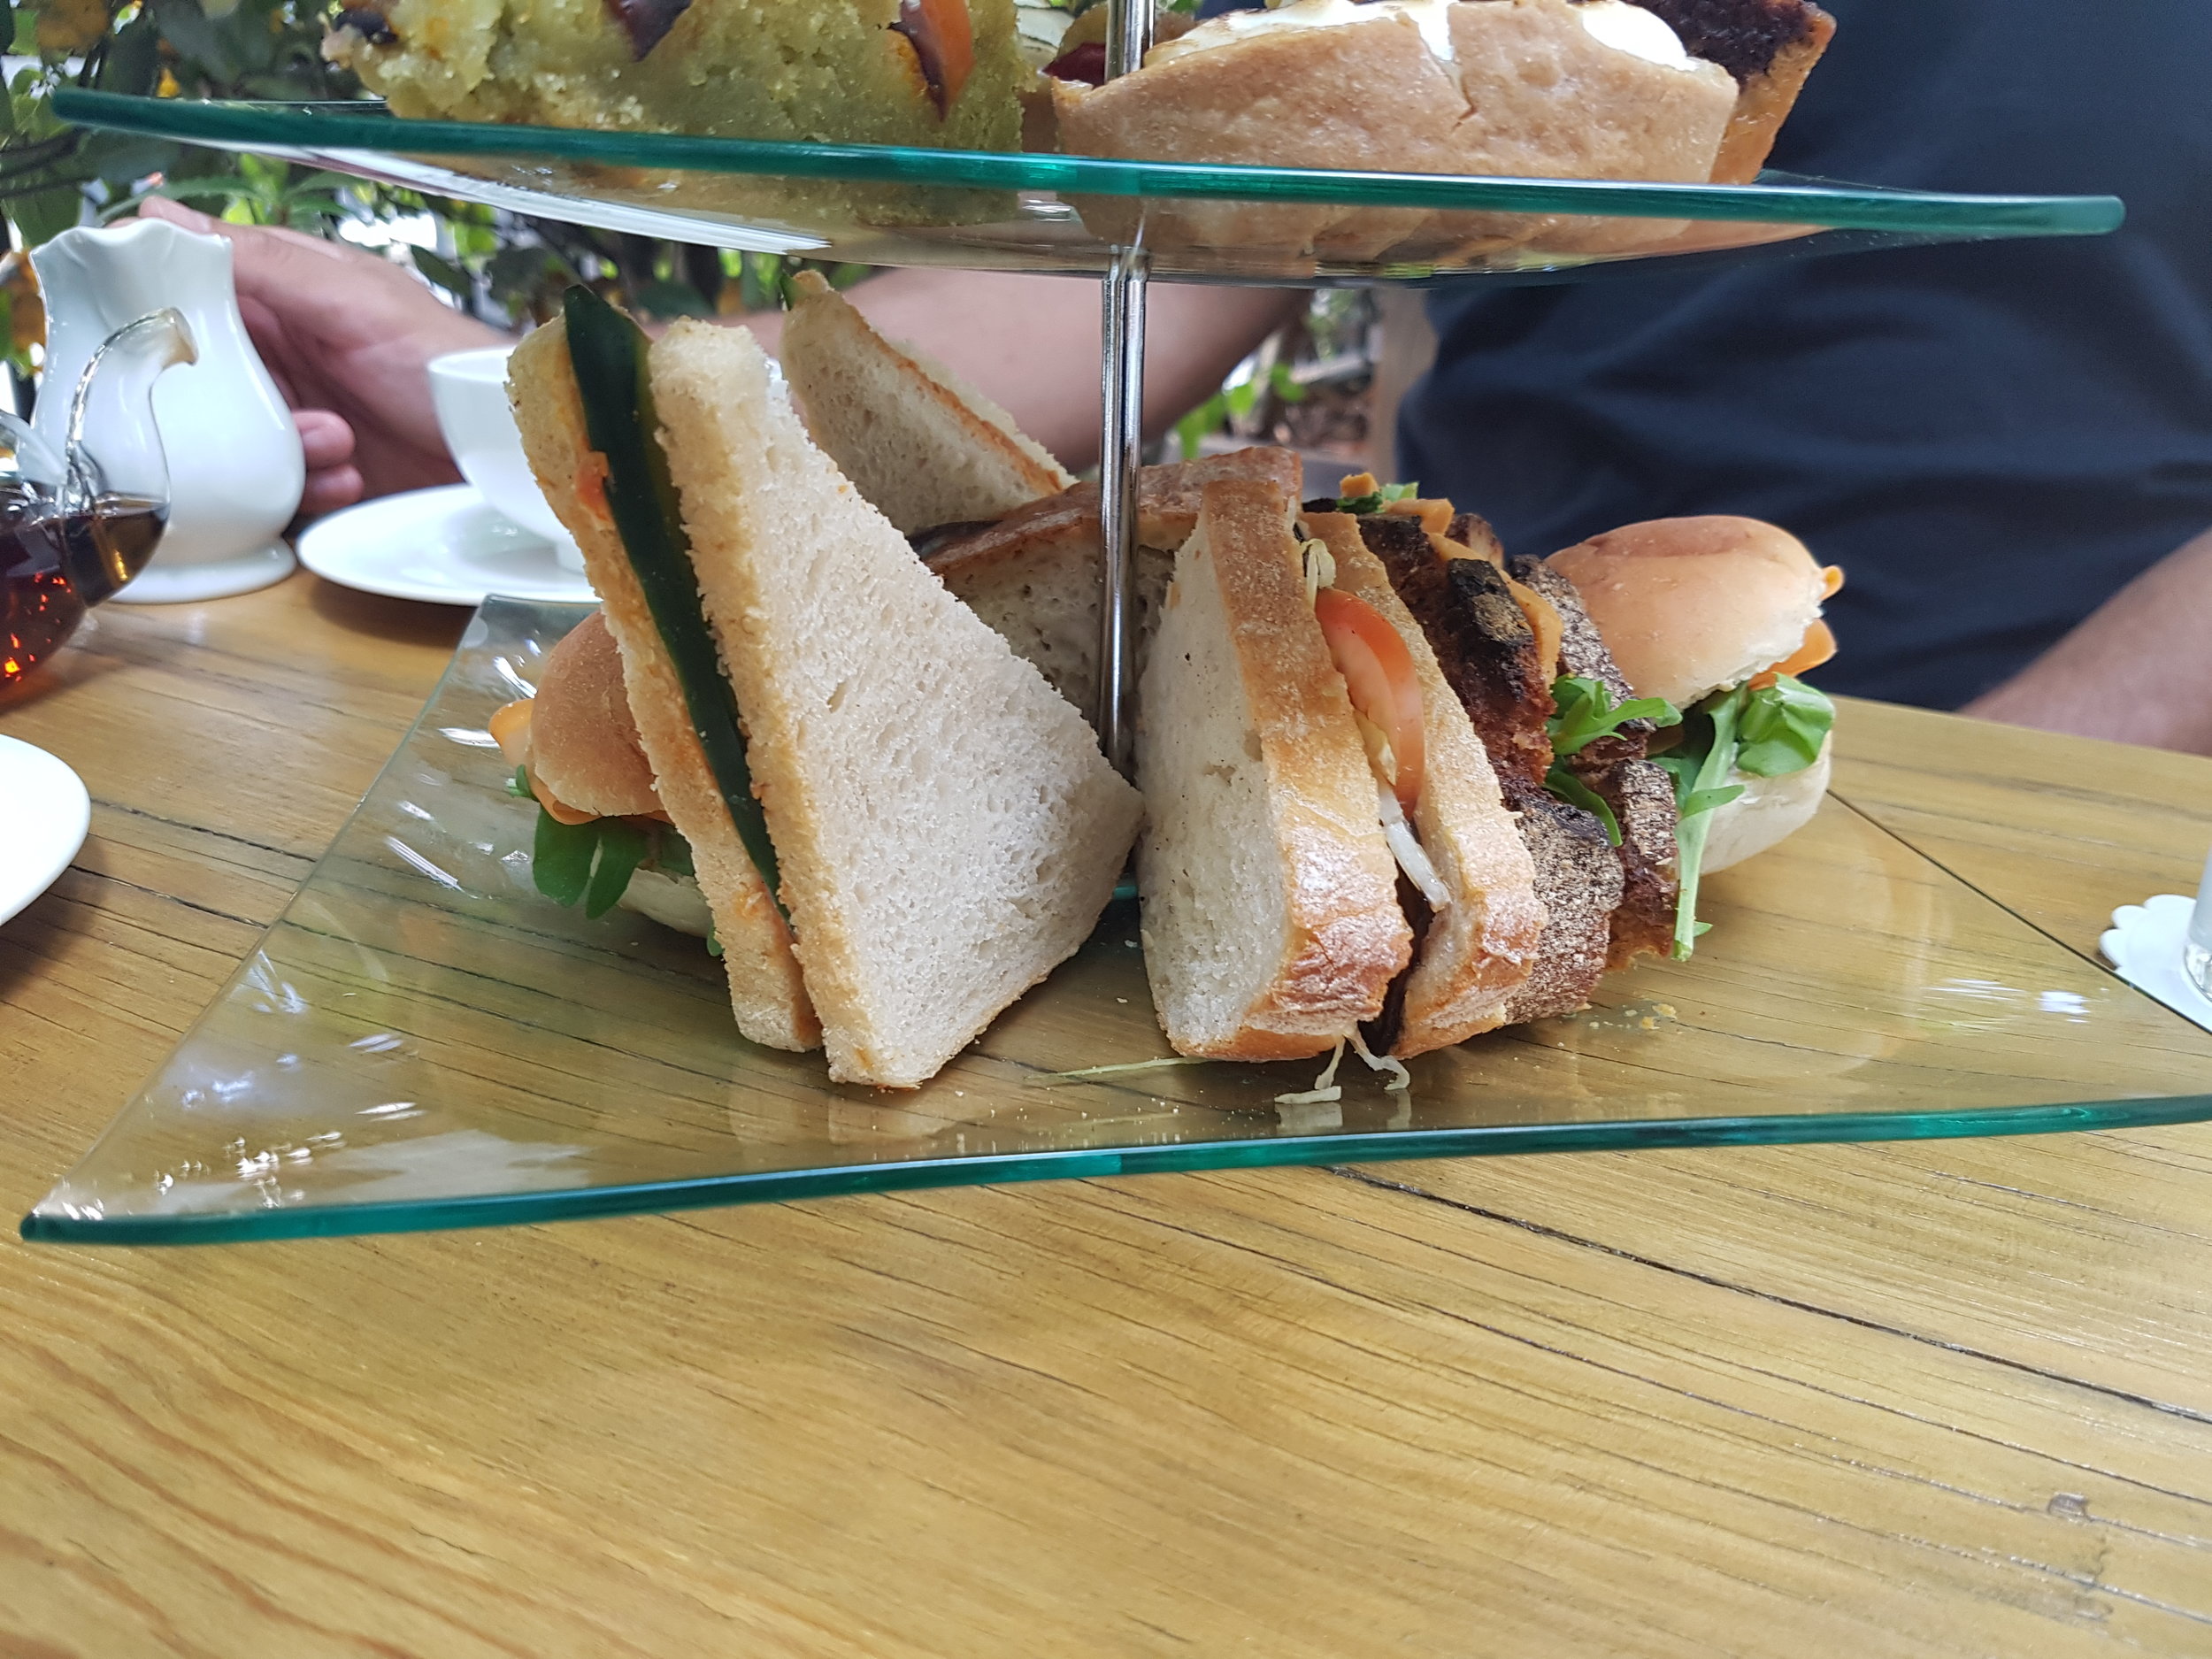 Vegan Afternoon Tea at Café Forty One 